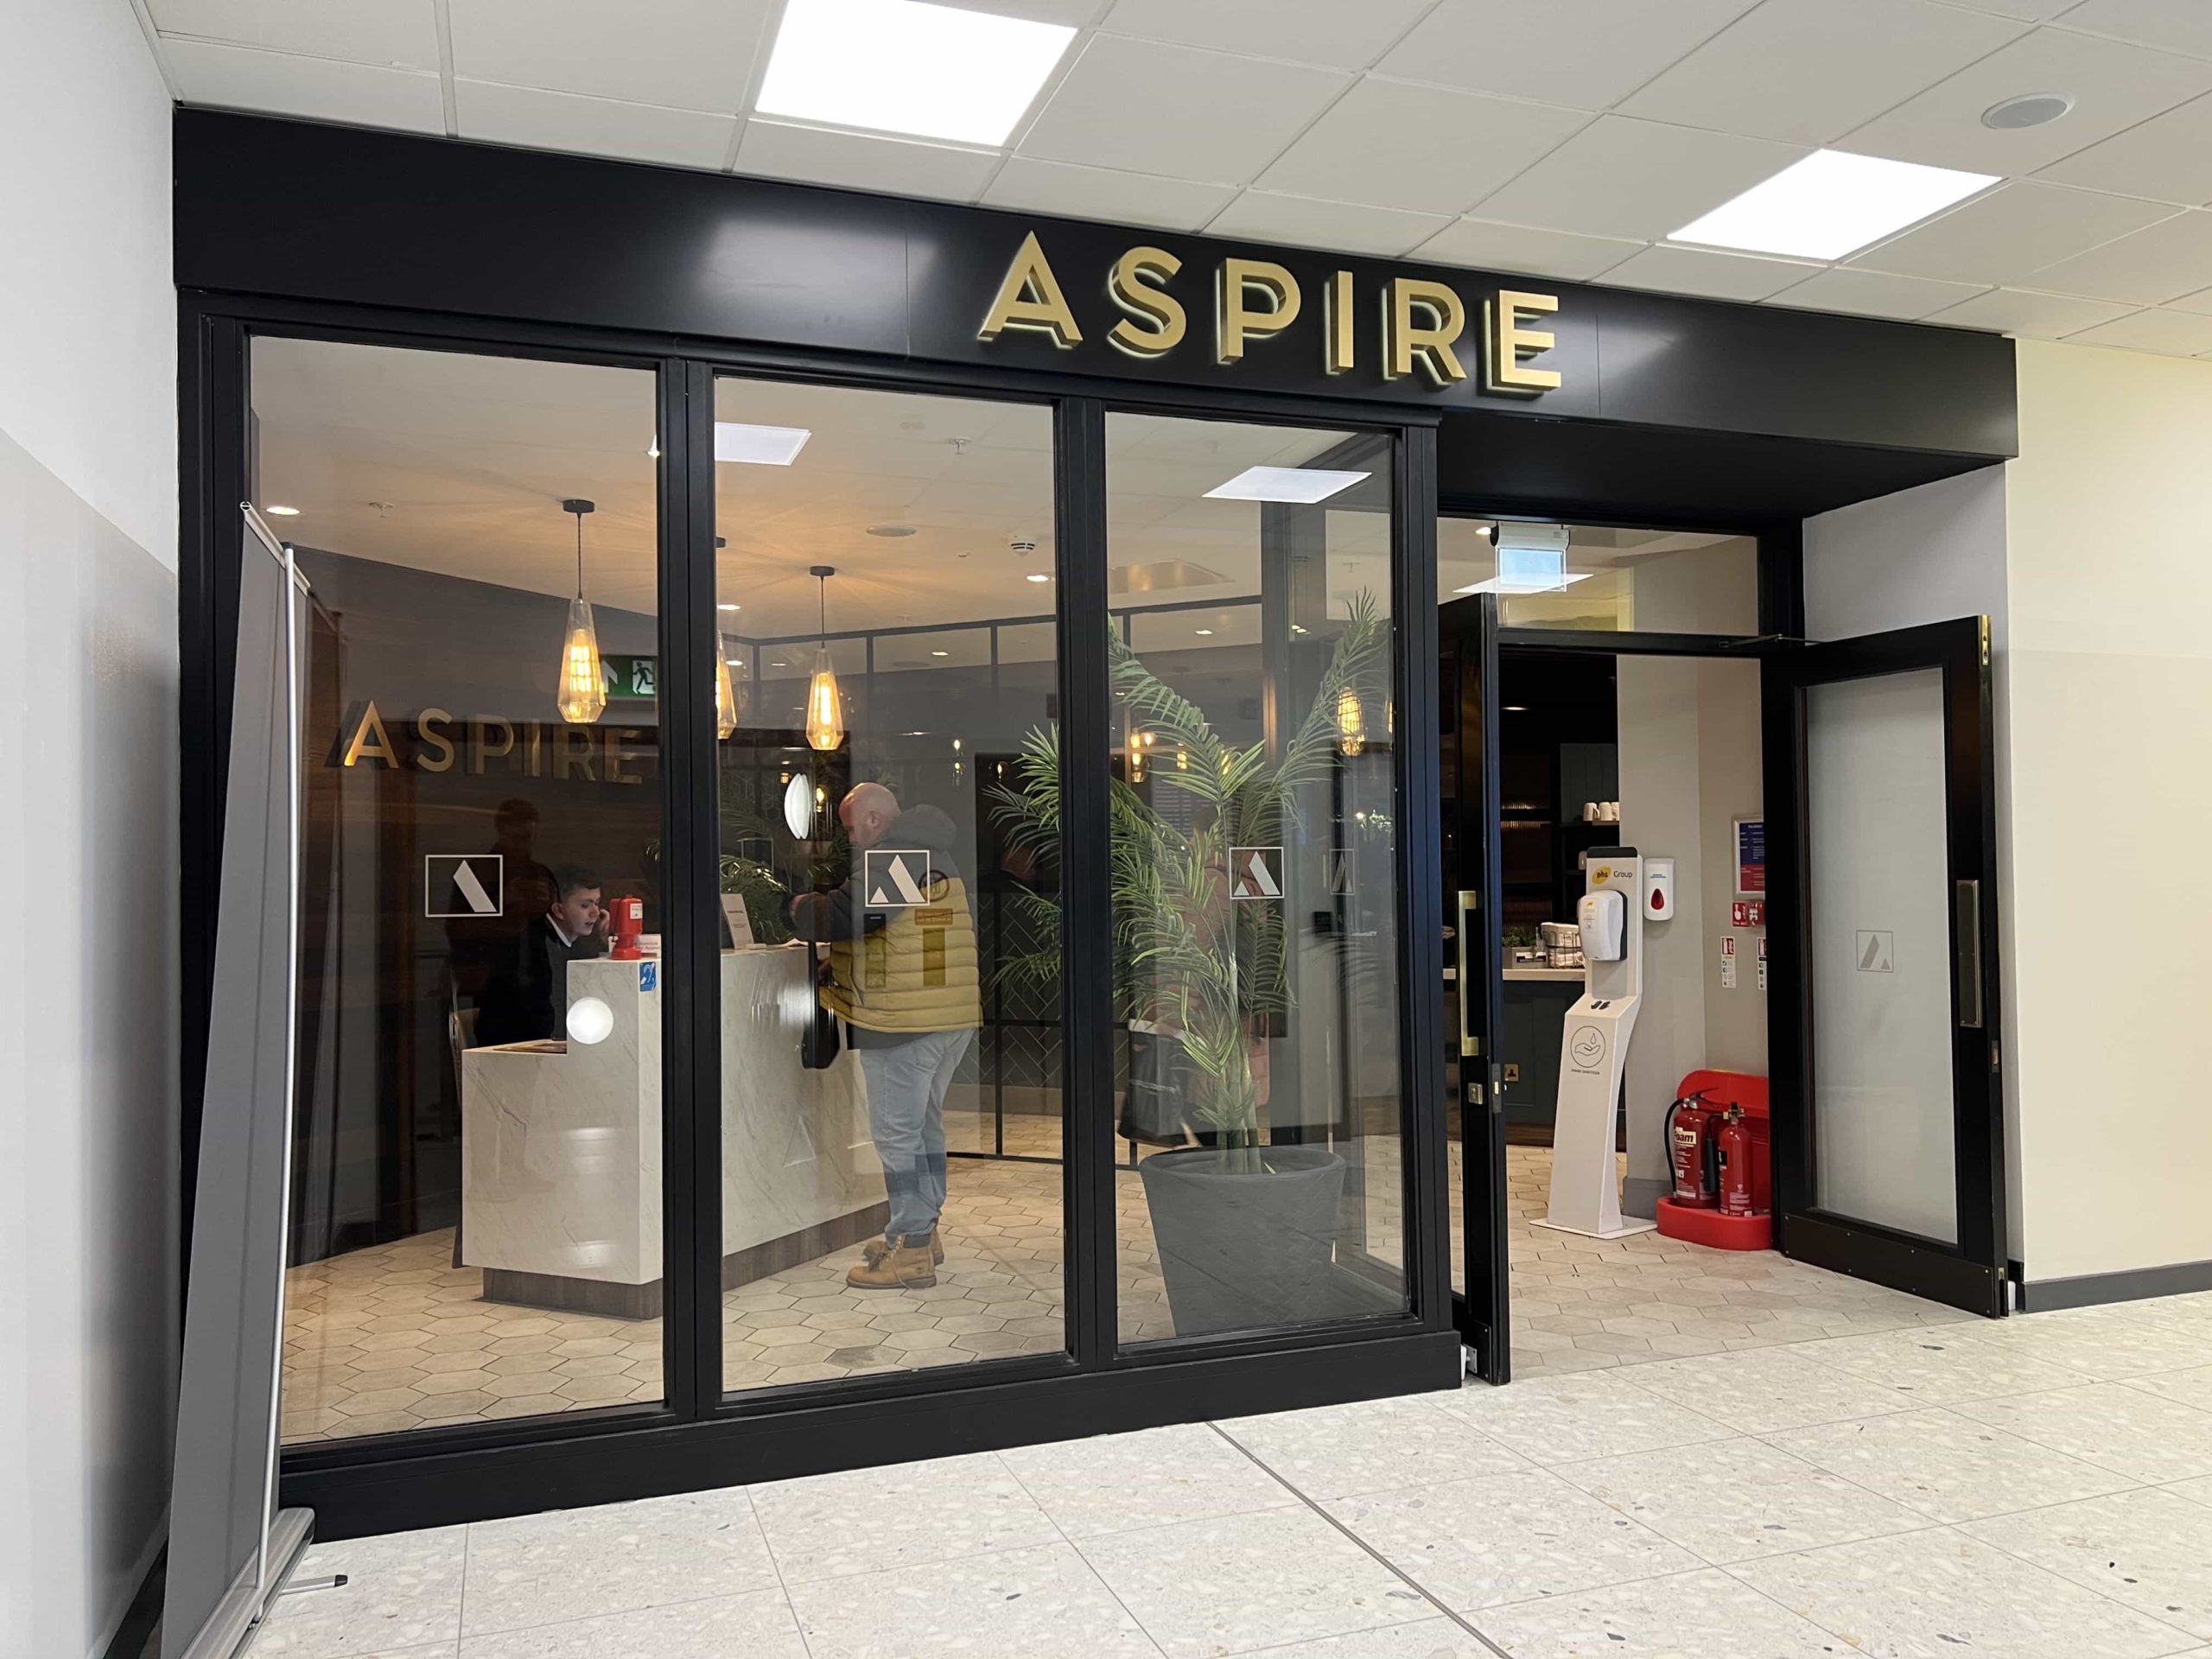 The glass-fronted entrance to Aspire Lounge at gate 16